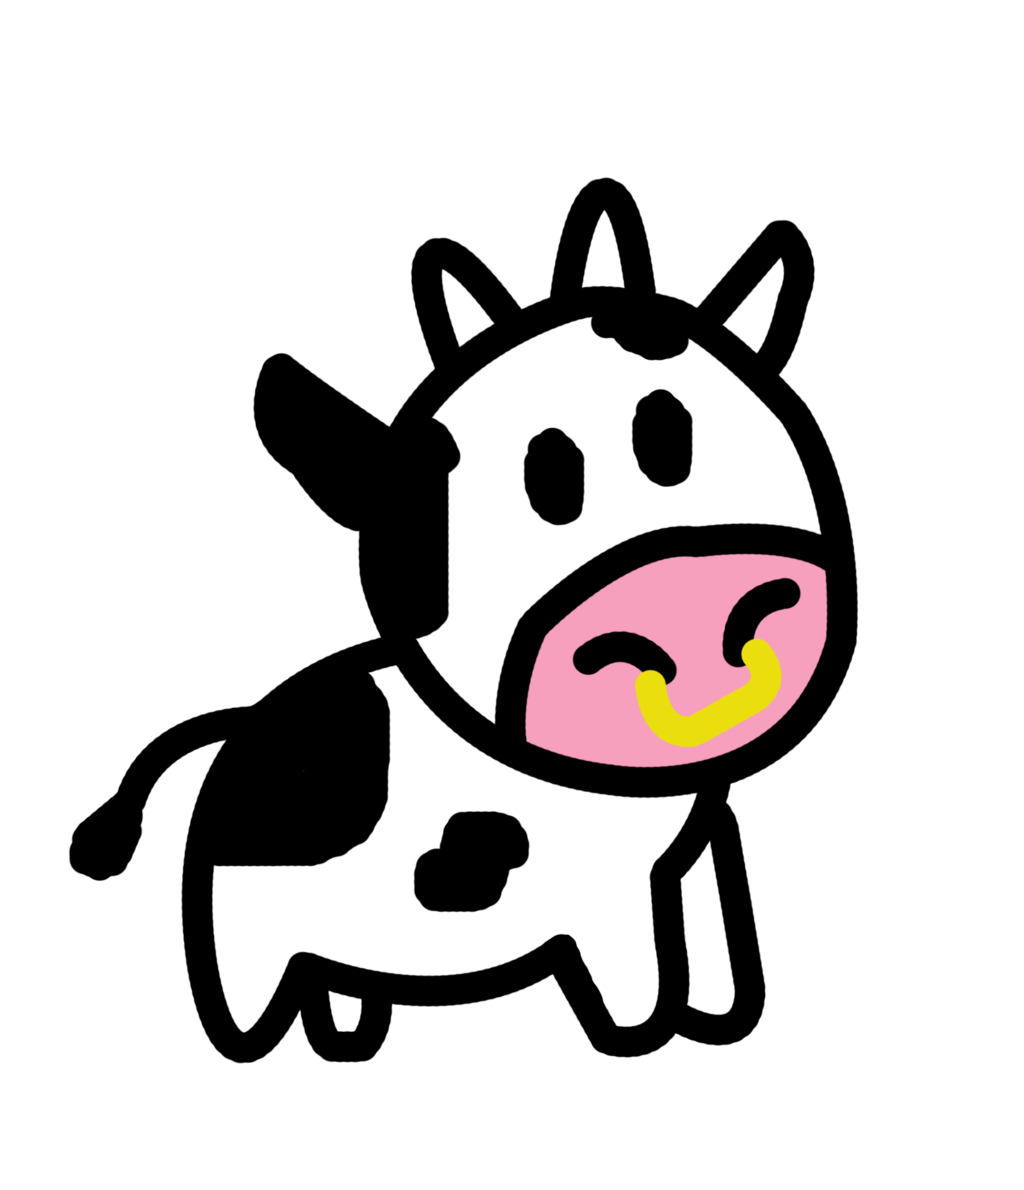 Images For Cute Animated Cows Cow Cartoon Png 1024x1190 Wallpaper Teahub Io